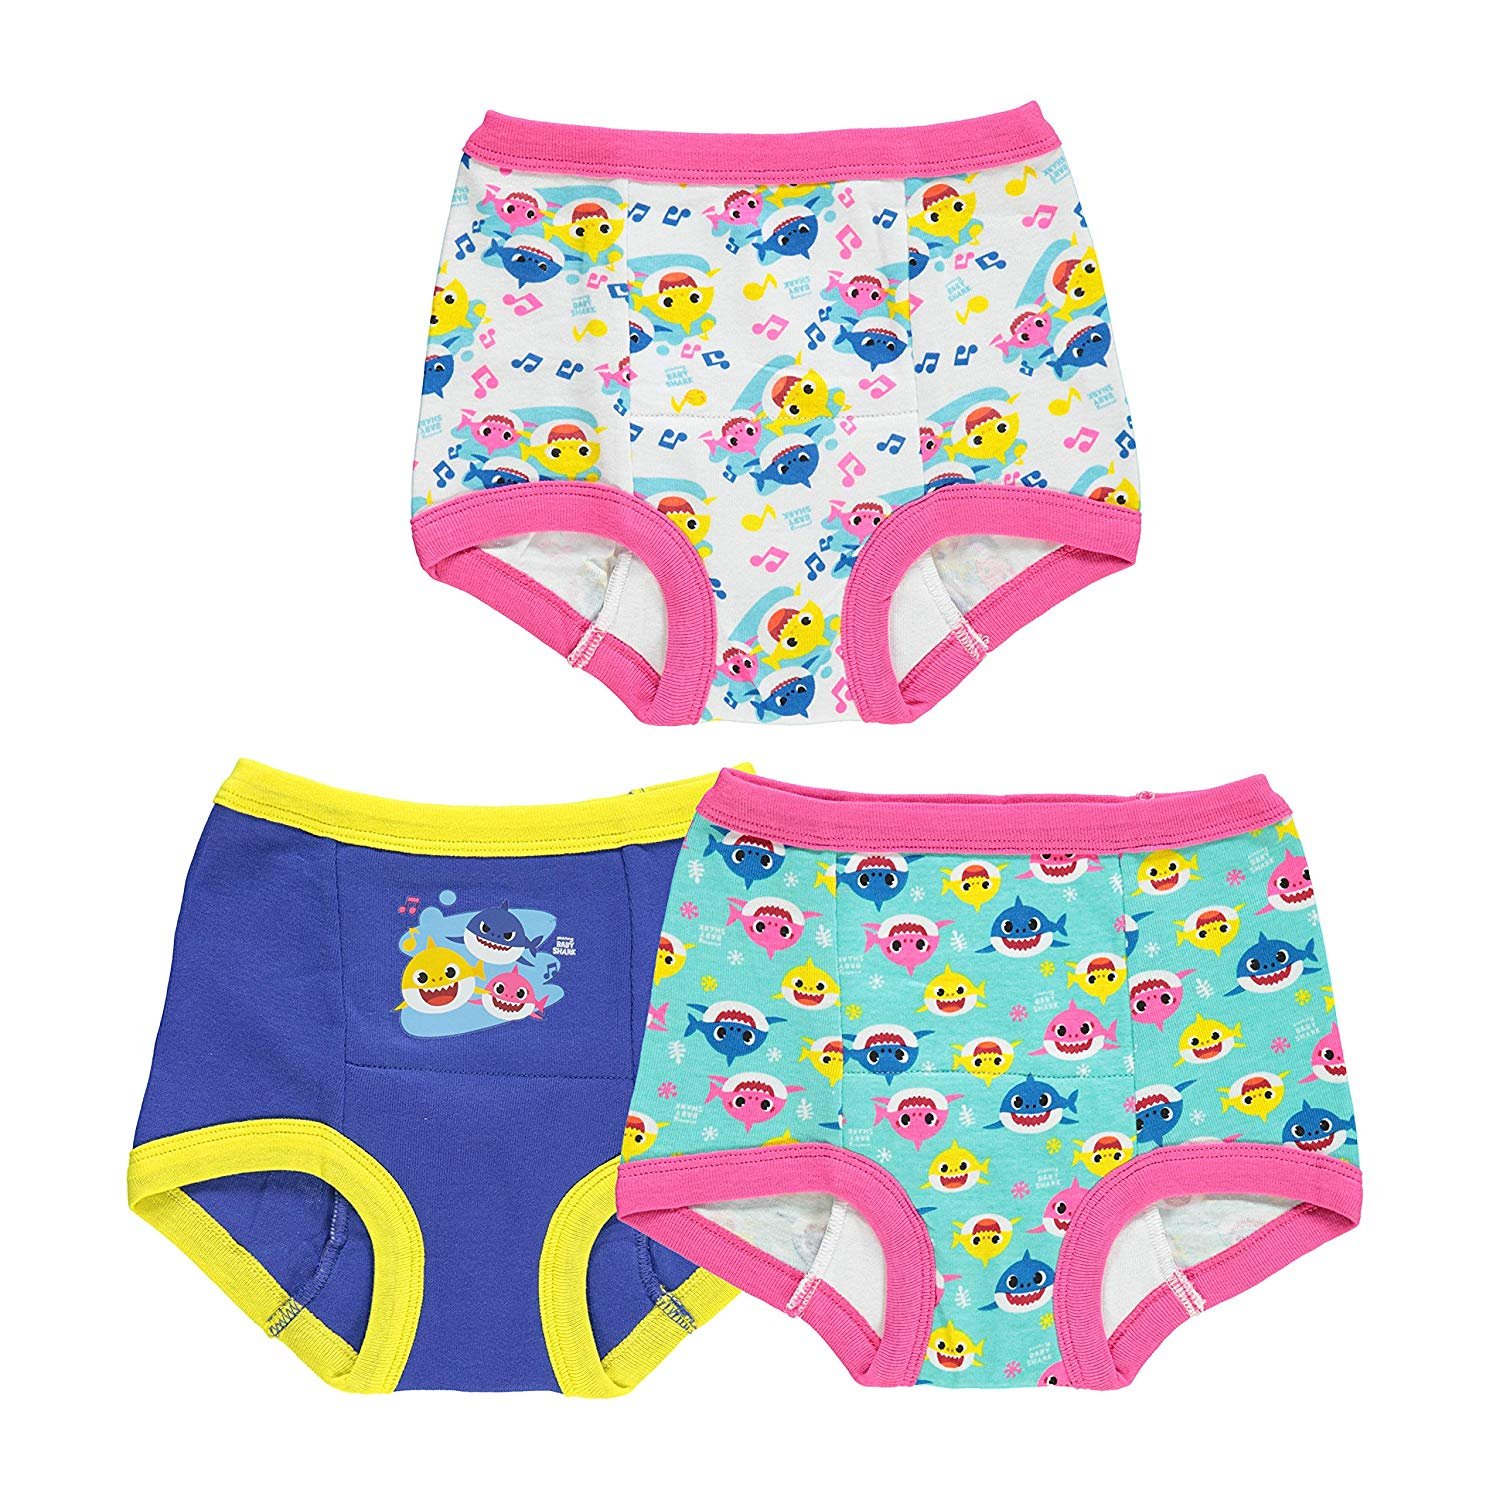 Toddler baby training underwear panties Underpants infant girl clothes FBB